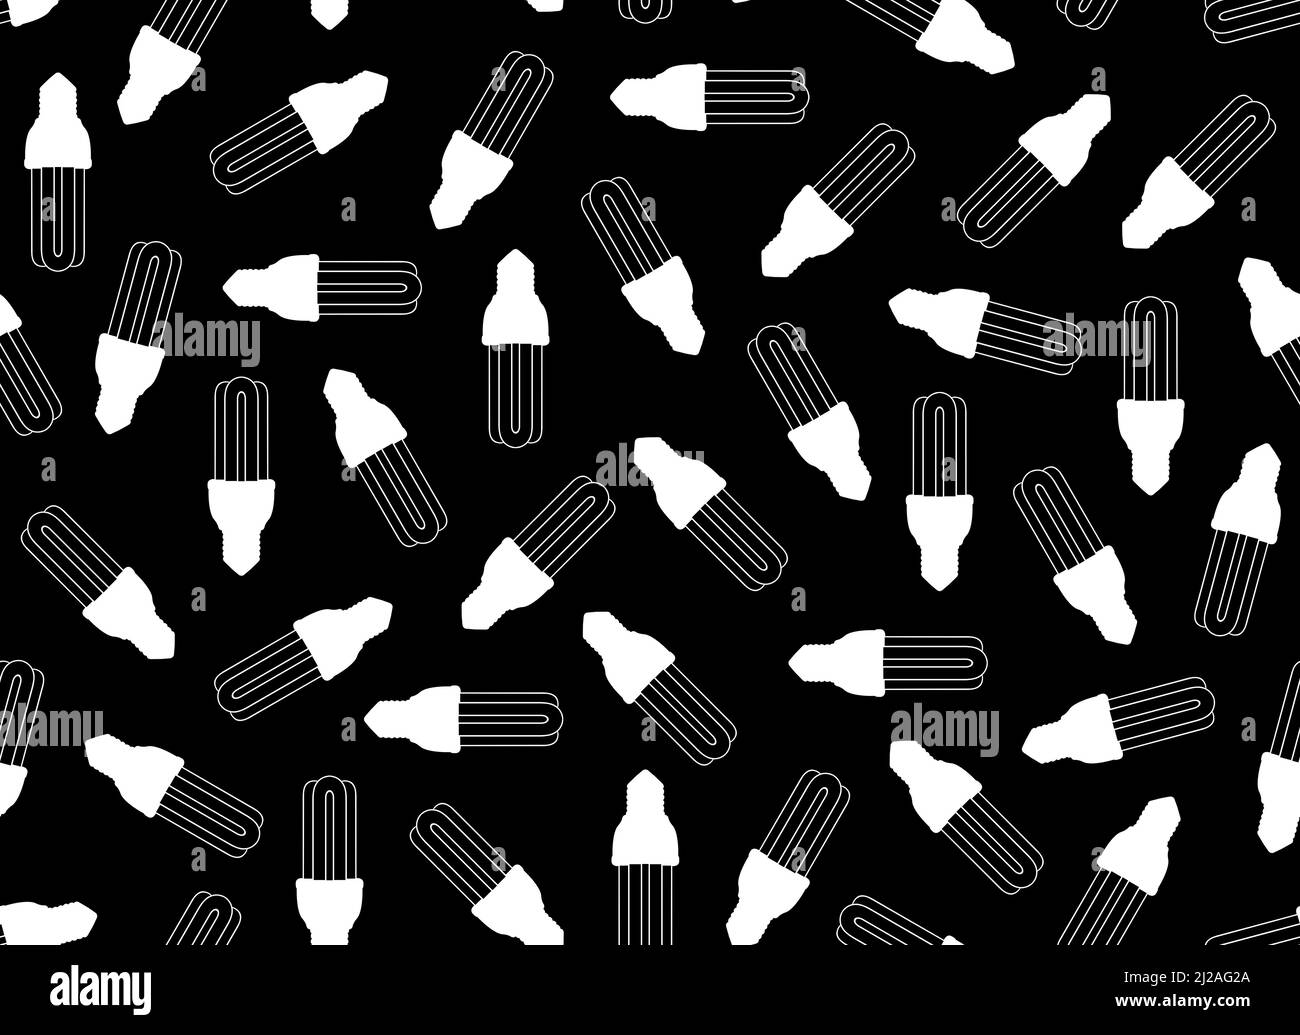 Illustration of light bulbs seamless with black background Stock Photo